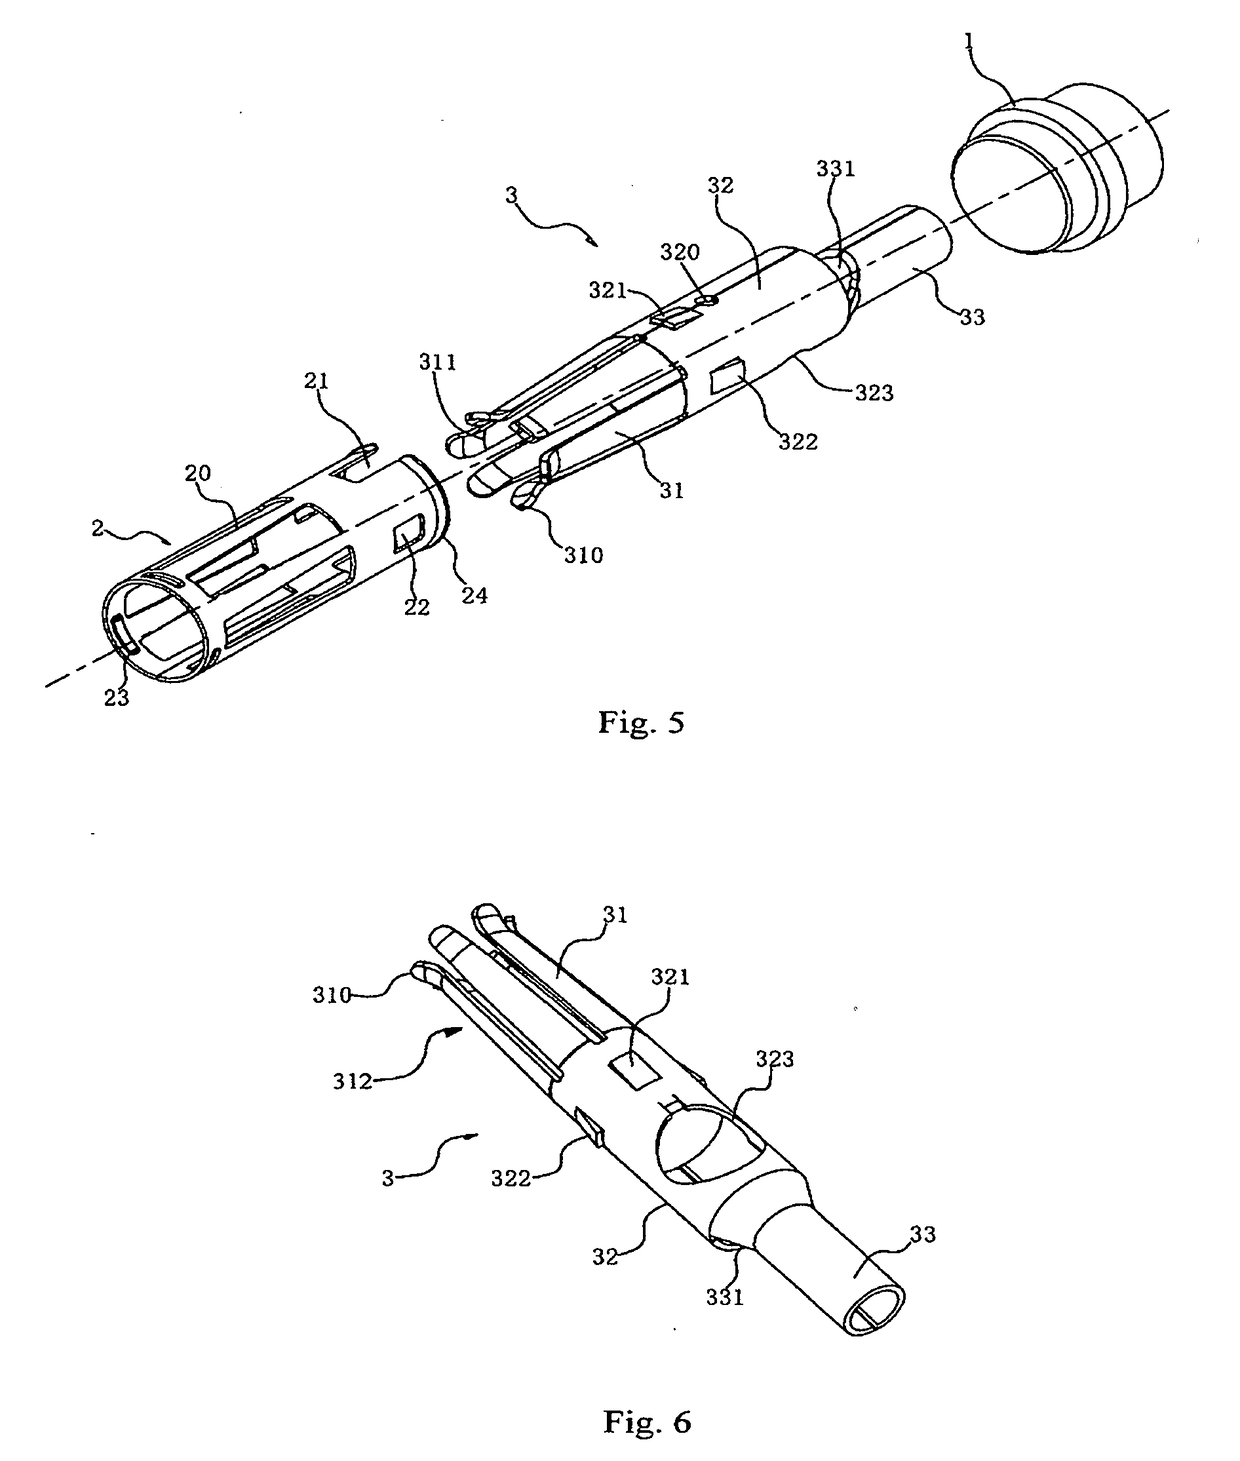 Charging connector for electric vehicle having one-piece sleeve and contact piece connected to each other